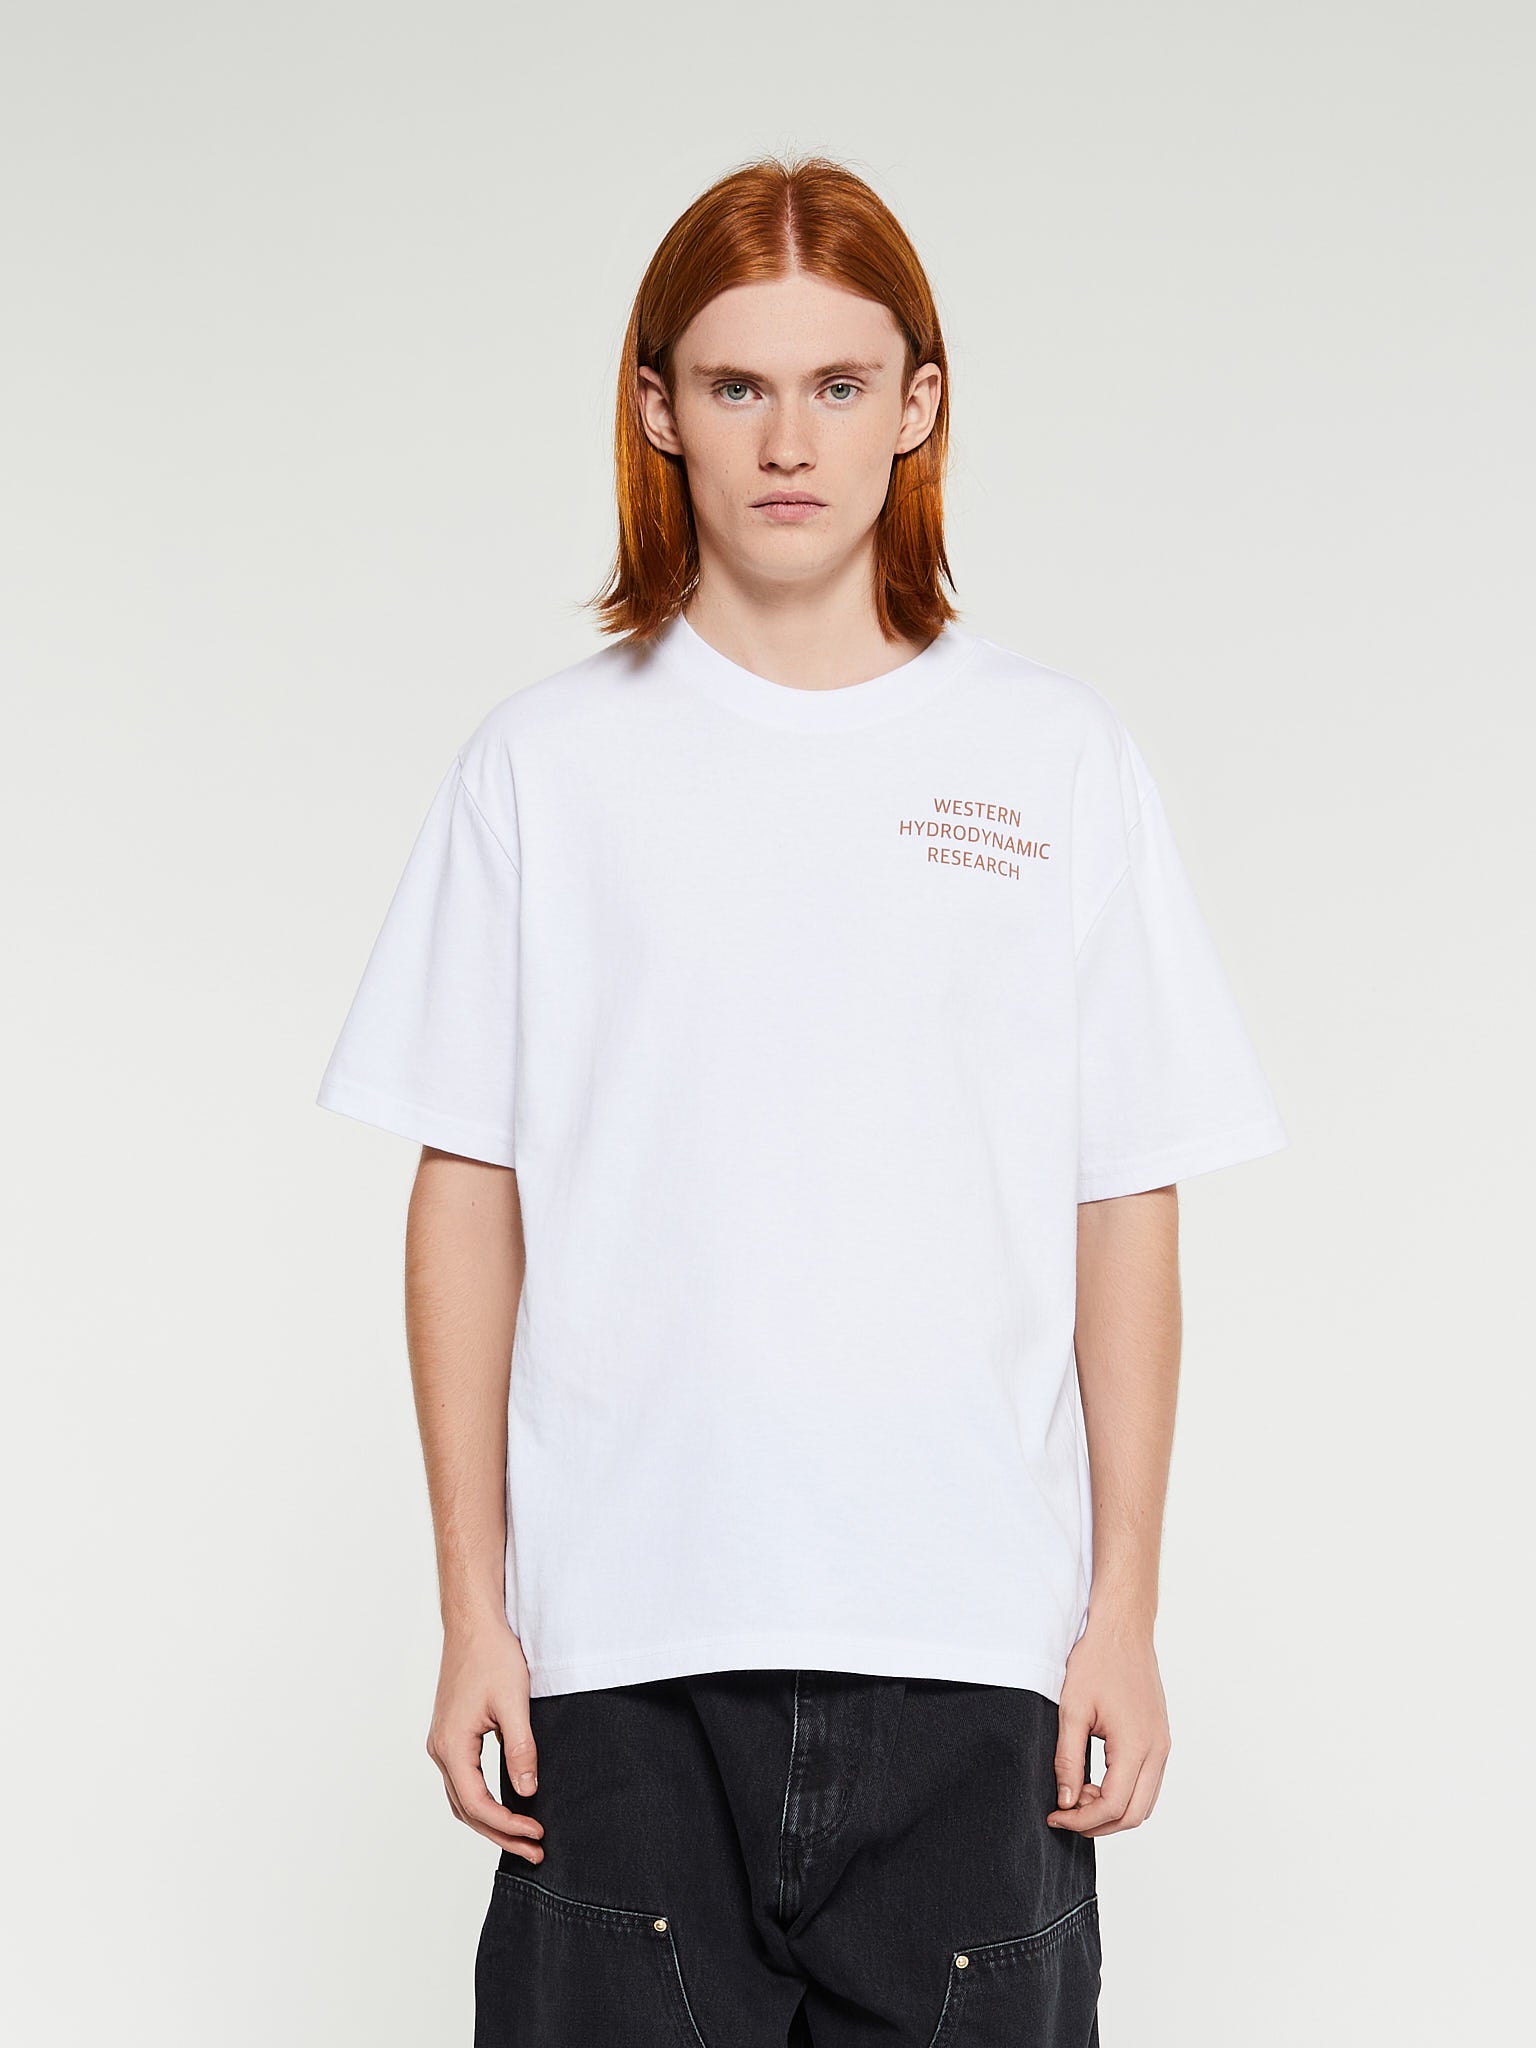 Western Hydrodynamic Research - Worker T-Shirt in White